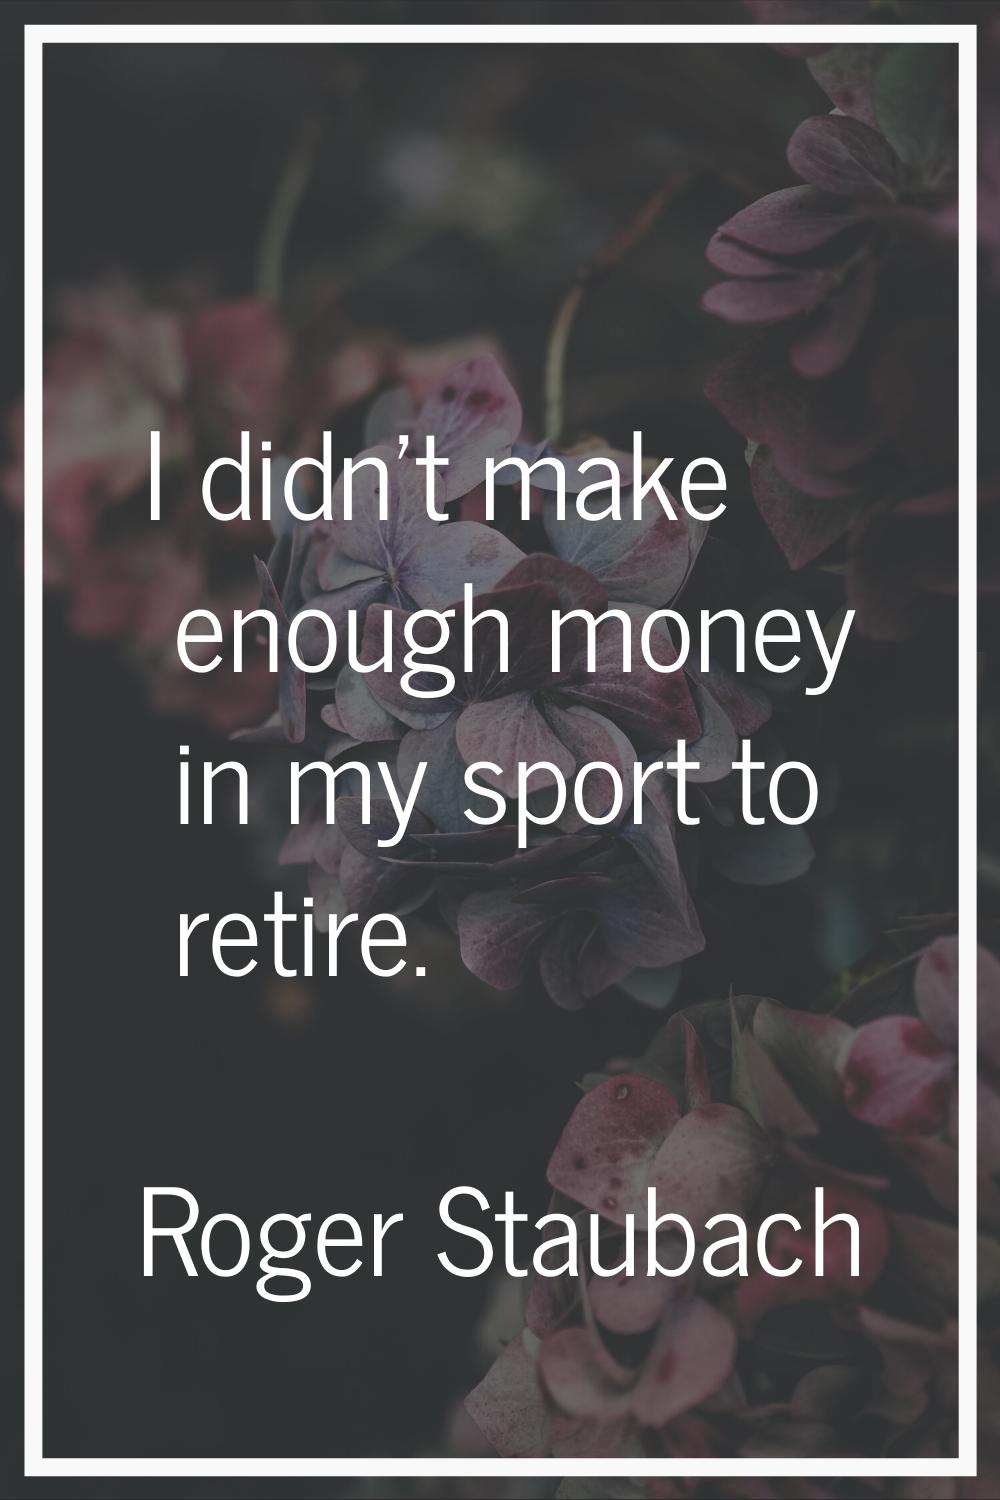 I didn't make enough money in my sport to retire.